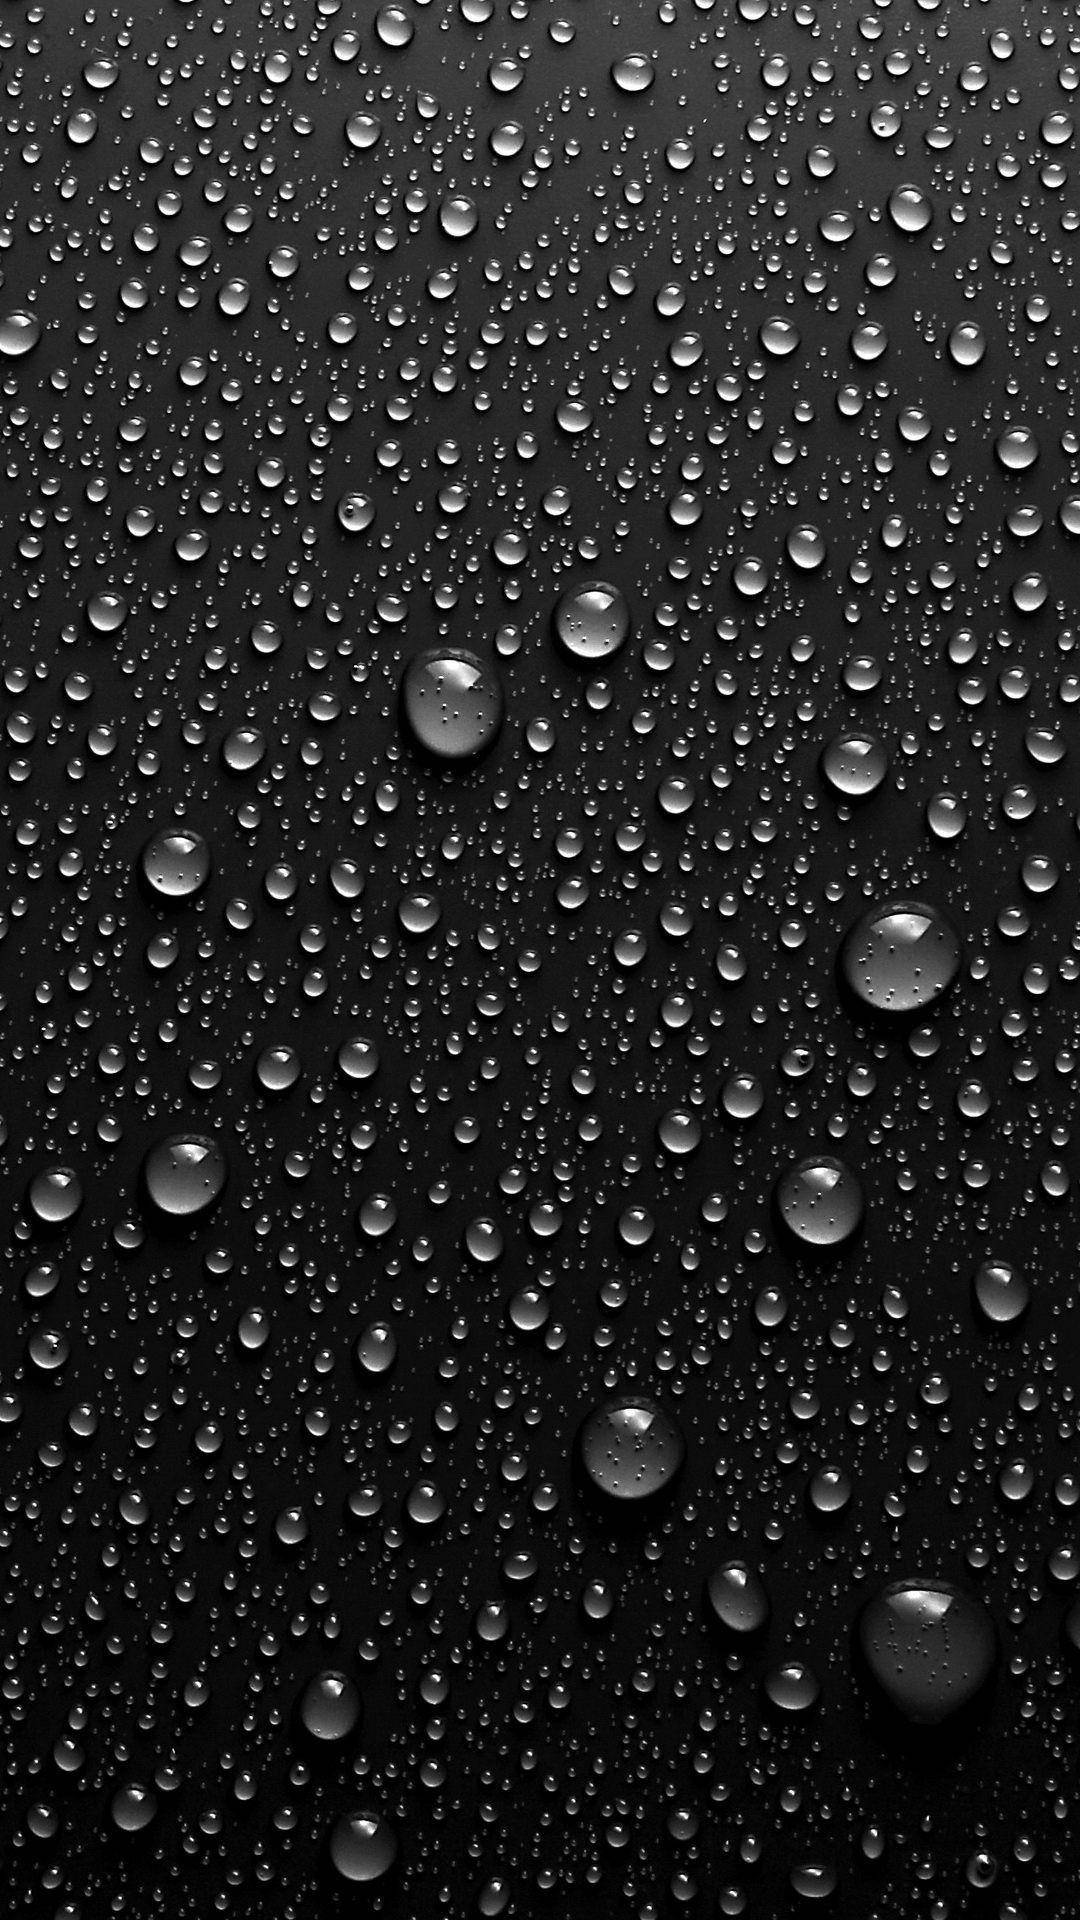 Droplets On Glass Iphone 8 Live Background